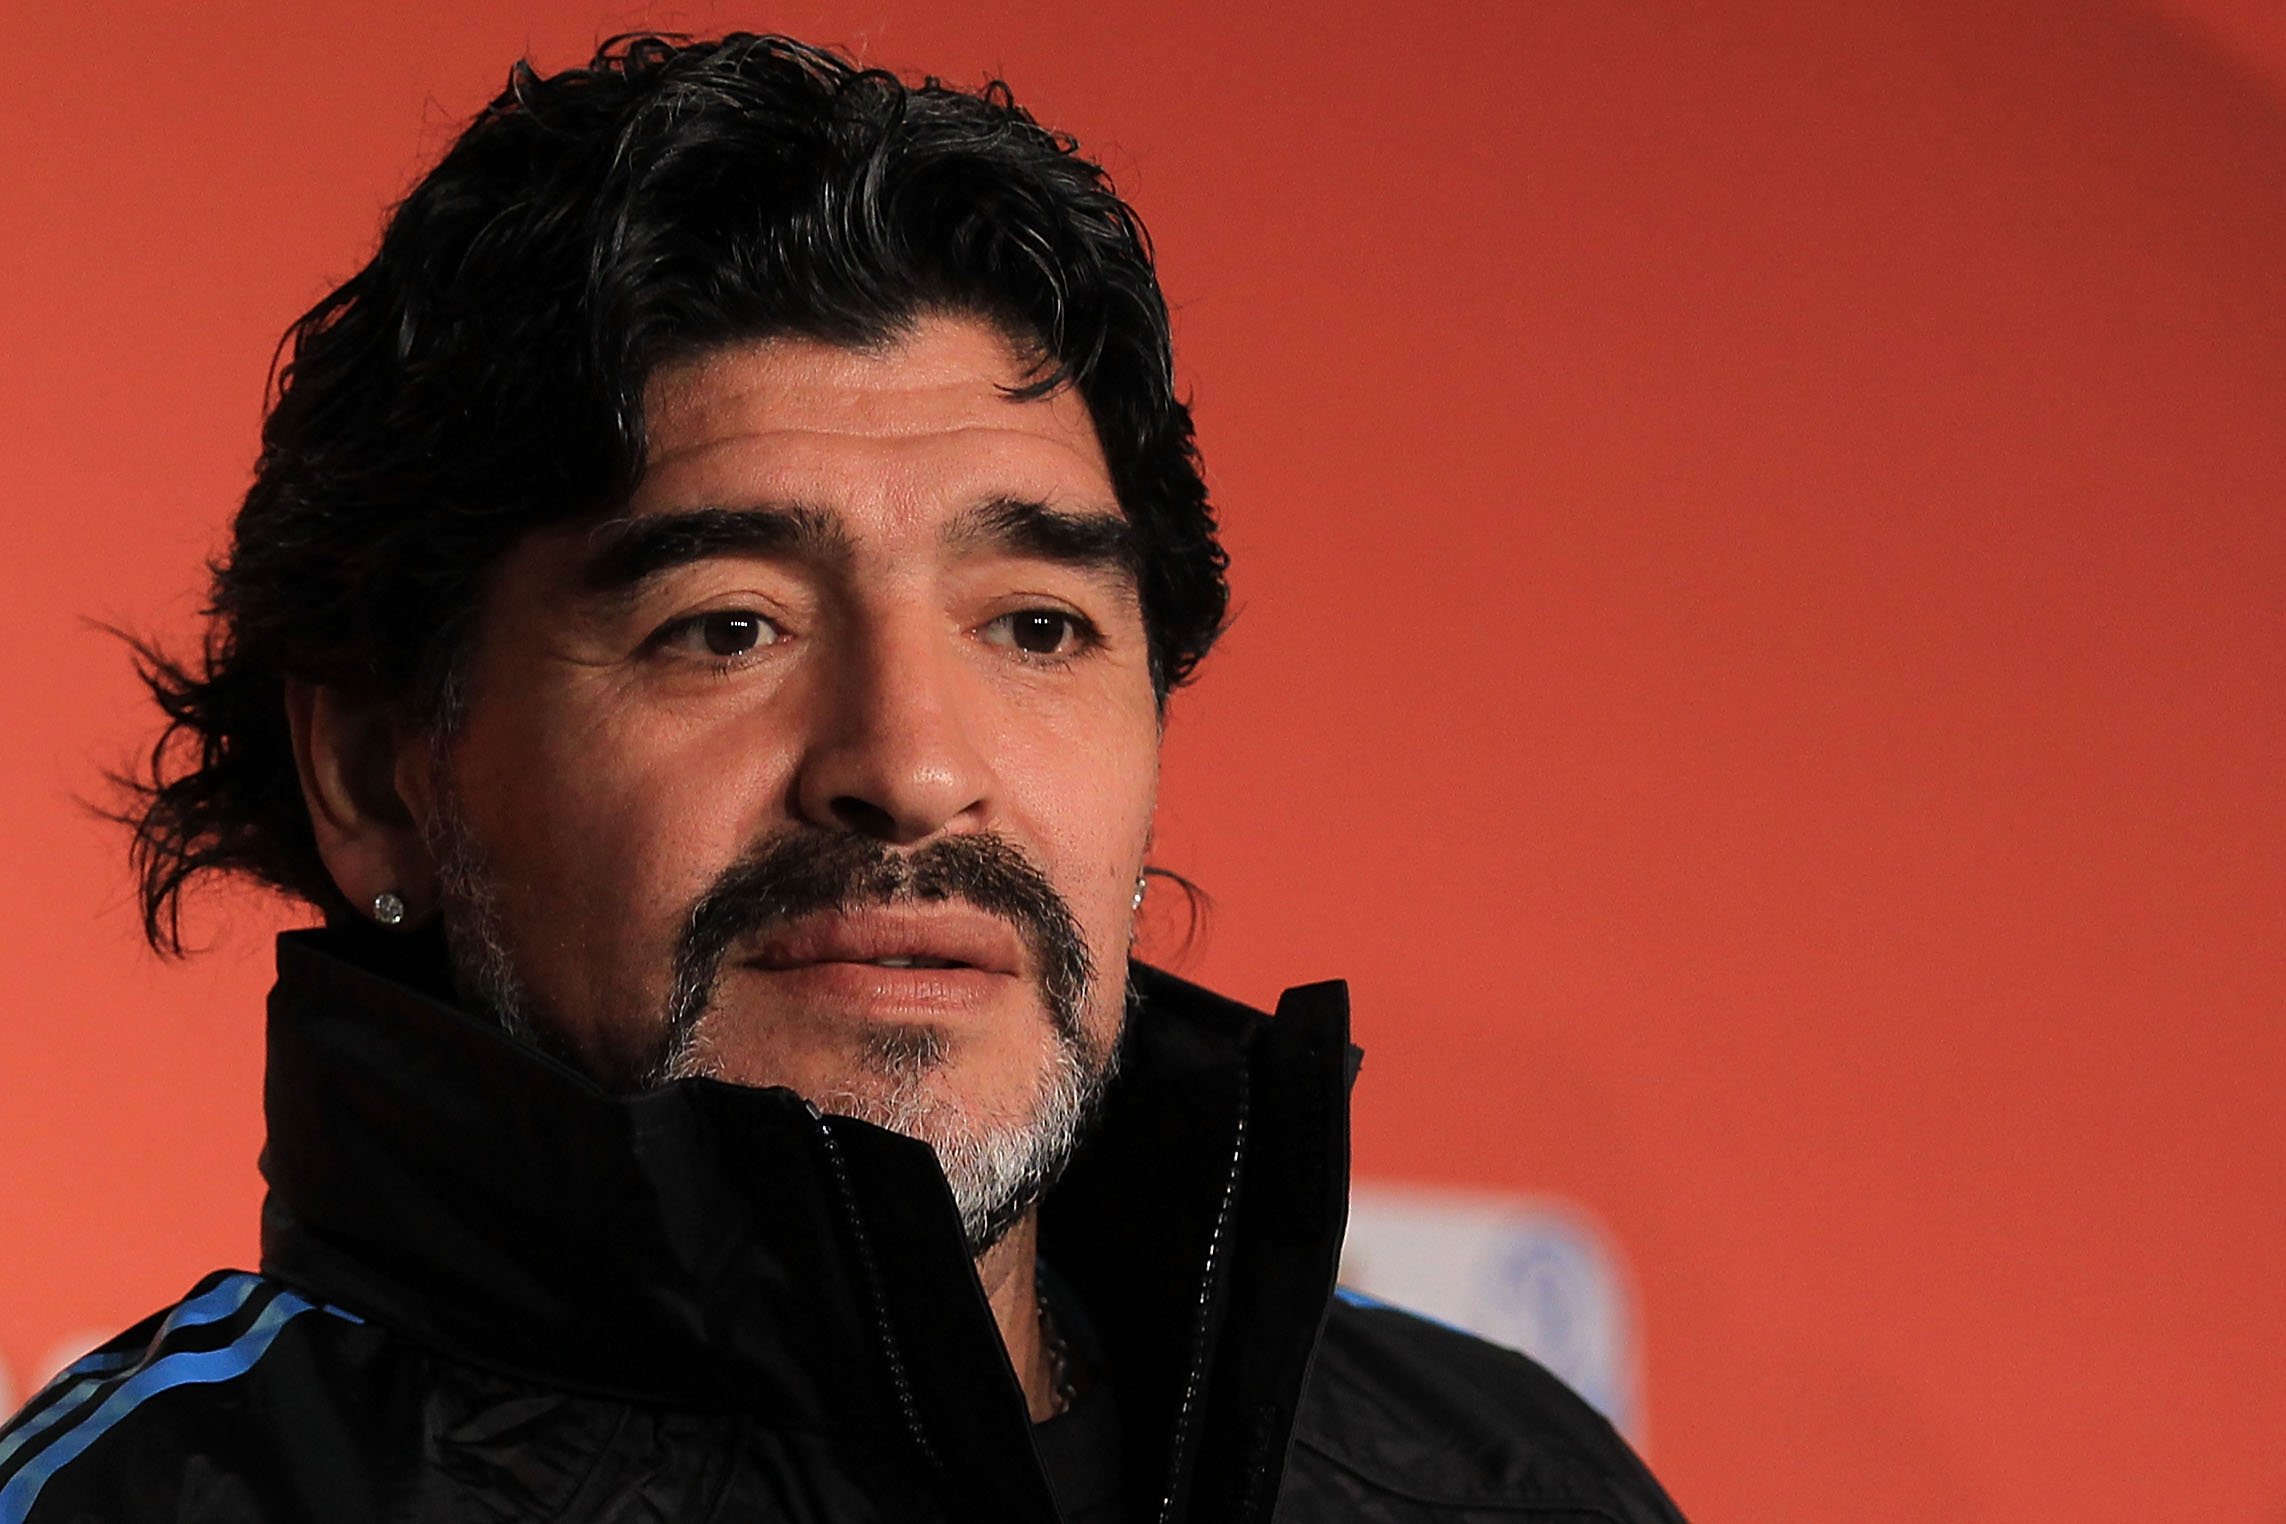 Diego Maradona speaks to the media during a press conference at Green Point Arena on July 2, 2010 | Photo: Getty Images